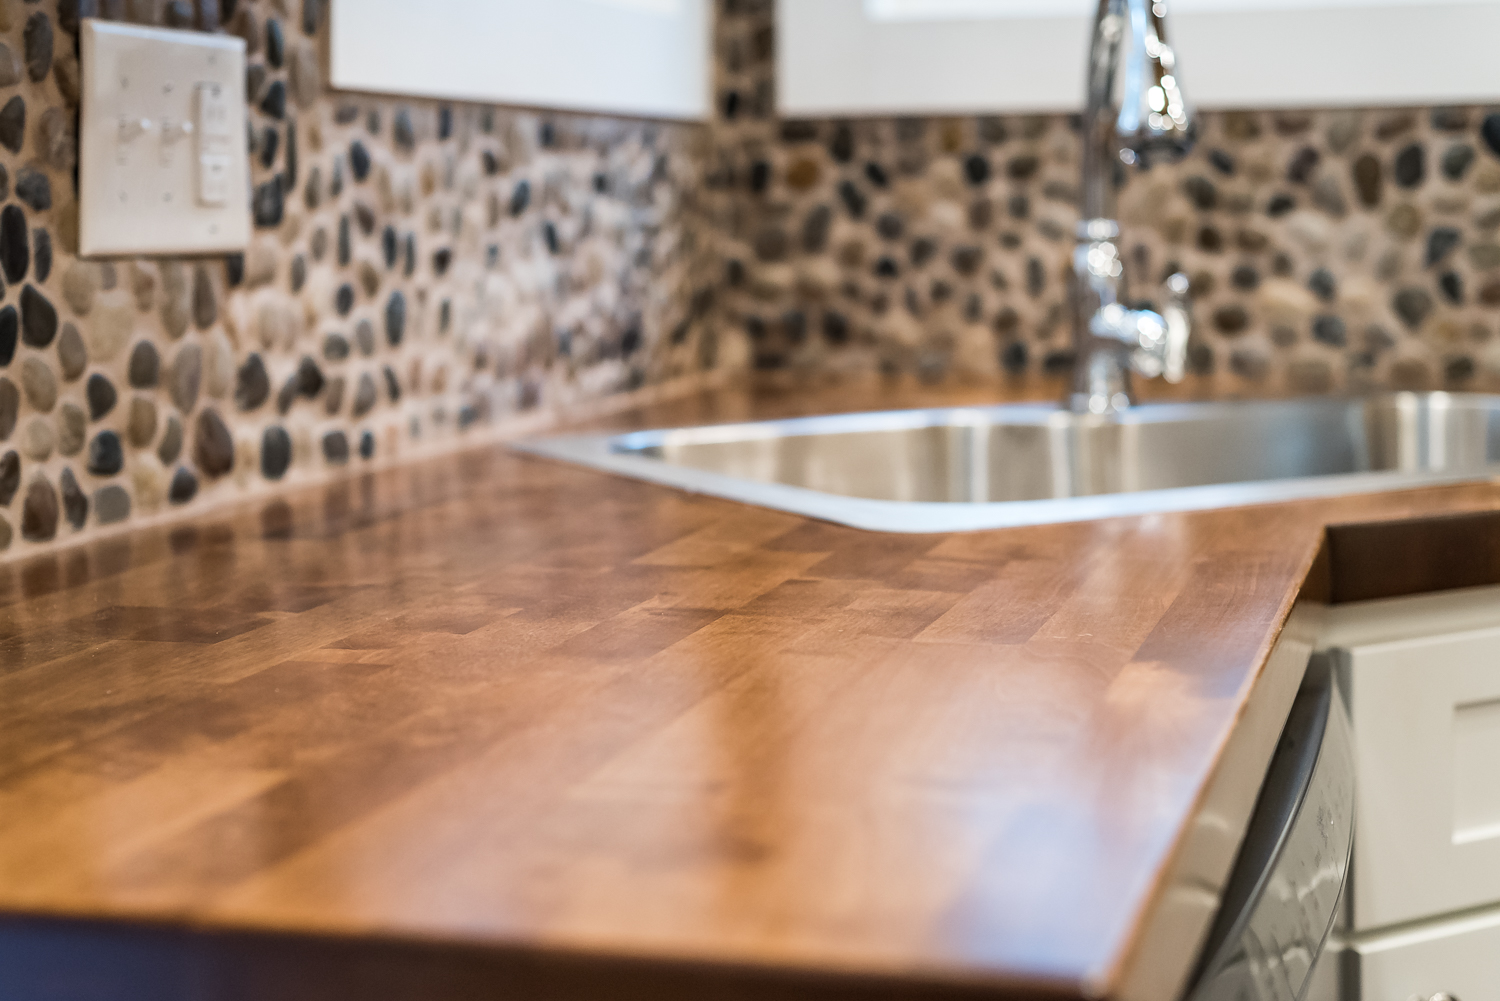 Dark brown wood countertop top with a chrome sink and faucet against a pebble-designed backwall